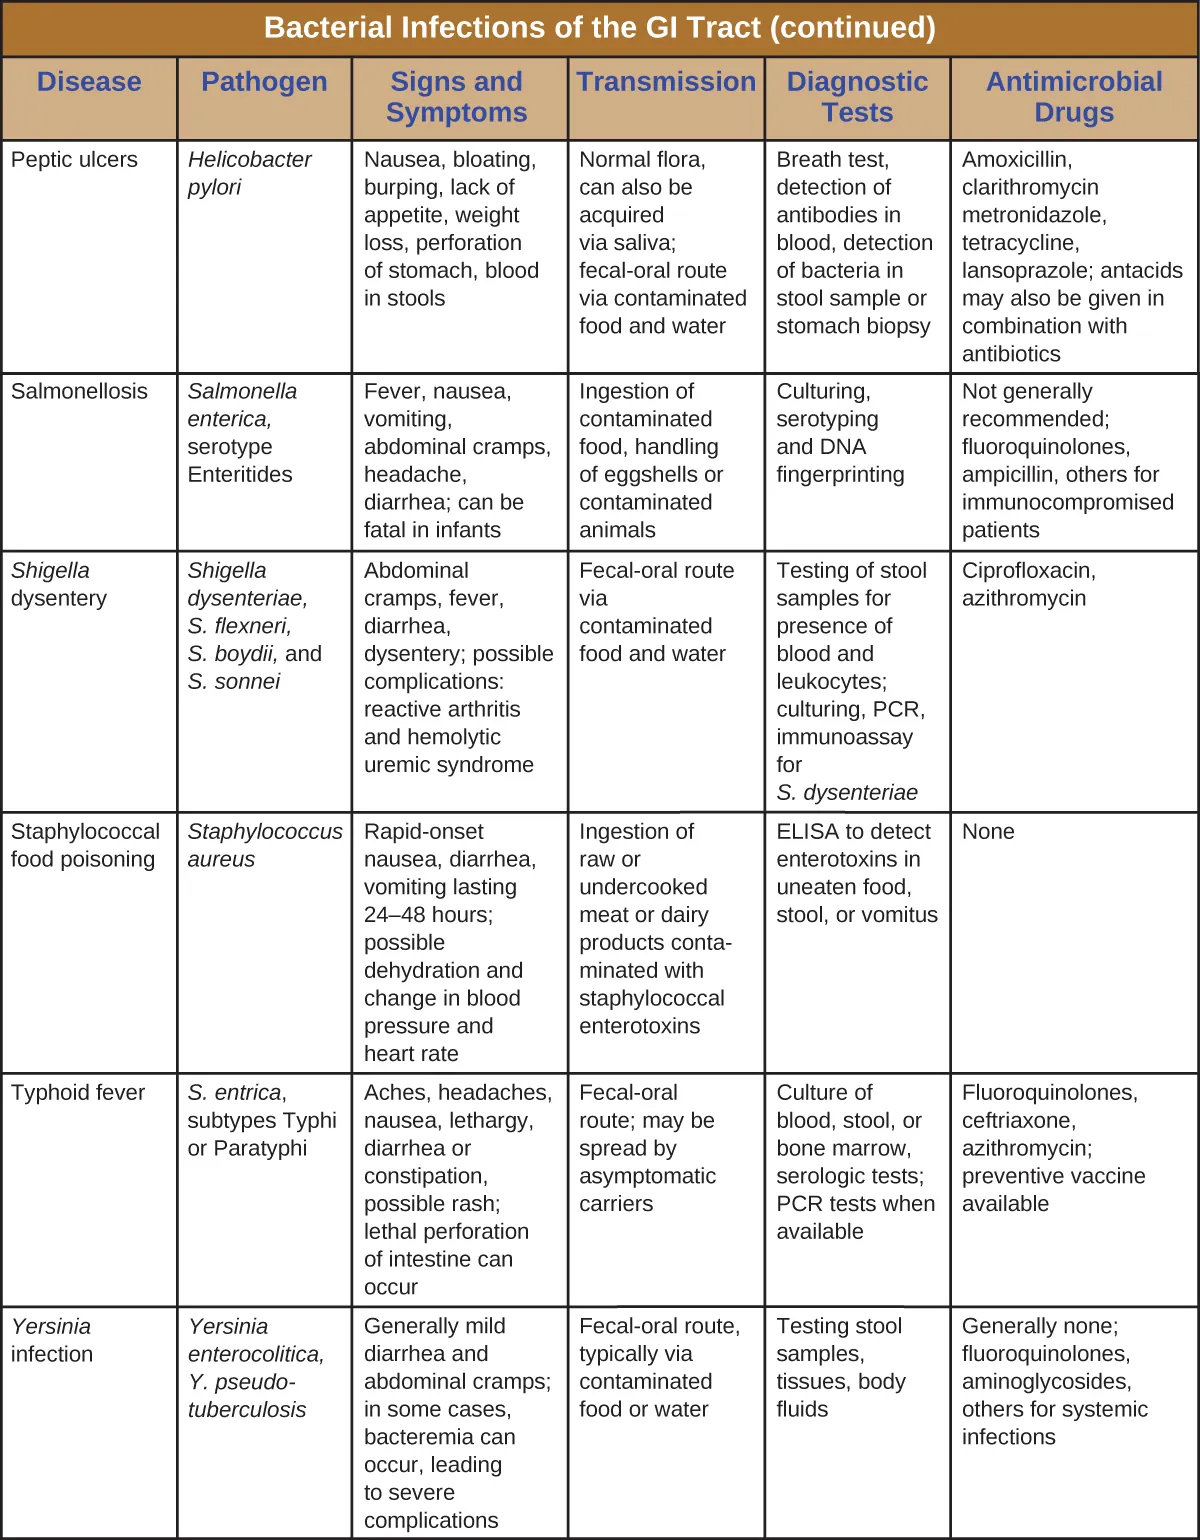 Table Titled: Bacterial Infections of the GI Tract (continued). Columns: Disease, Pathogen, Signs and Symptoms, Transmission, Diagnostic Tests, Antimicrobial Drugs. Peptic ulcers; Helicobacter pylori; Nausea, bloating, burping, lack of appetite, weight loss, perforation of stomach, blood in stools ; Normal flora, can also be acquired via saliva, Fecal-oral route via contaminated food and water; Breath test, detection of antibodies in blood, detection of bacteria in stool sample or stomach biopsy; Amoxicillin, clarithromycin metronidazole, tetracycline, lansoprazole; antacids may also be given in combination with antibiotics. Salmonellosis; Salmonella enterica, serotype Enteritides; Fever, nausea, vomiting, abdominal cramps, headache, diarrhea; can be fatal in infants; Ingestion of contaminated food, handling of eggshells or contaminated animals Culturing, serotyping and DNA fingerprinting ; Not generally recommended; fluoroquinolones, ampicillin, others for immunocompromised patients. Shigella dysentery; Shigella dysenteriae, S. flexneri, S. boydii, and S. sonnei; Abdominal cramps, fever, diarrhea, dysentery; possible complications: reactive arthritis and hemolytic uremic syndrome; Fecal-oral route via contaminated food and water; Testing of stool samples for presence of blood and leukocytes; culturing, PCR, immunoassay for S. dysenteriae; Ciprofloxacin, azithromycin. Staphylococcal food poisoning; Staphylococcus aureus; Rapid-onset nausea, diarrhea, vomiting lasting 24–48 hours; possible dehydration and change in blood pressure and heart rate;Ingestion of raw or undercooked meat or dairy products contaminated with staphylococcal enterotoxins; ELISA to detect enterotoxins in uneaten food, stool, or vomitus ; None. Typhoid fever; S. enterica, subtypes Typhi or Paratyphi Aches, headaches, nausea, lethargy, diarrhea or constipation, possible rash; lethal perforation of intestine can occur Fecal-oral route; may be spread by asymptomatic carriers; Culture of blood, stool, or bone marrow, serologic tests; PCR tests when available; Fluoroquinolones, ceftriaxone, azithromycin; preventive vaccine available.  Yersinia infection; Yersinia enterocolitica, Y. pseudotuberculosis; Generally mild diarrhea and abdominal cramps; in some cases, bacteremia can occur, leading to severe complications; Fecal-oral route, typically via contaminated food or water Testing stool samples, tissues, body fluids; Generally none; fluoroquinolones, aminoglycosides, others for systemic infections.